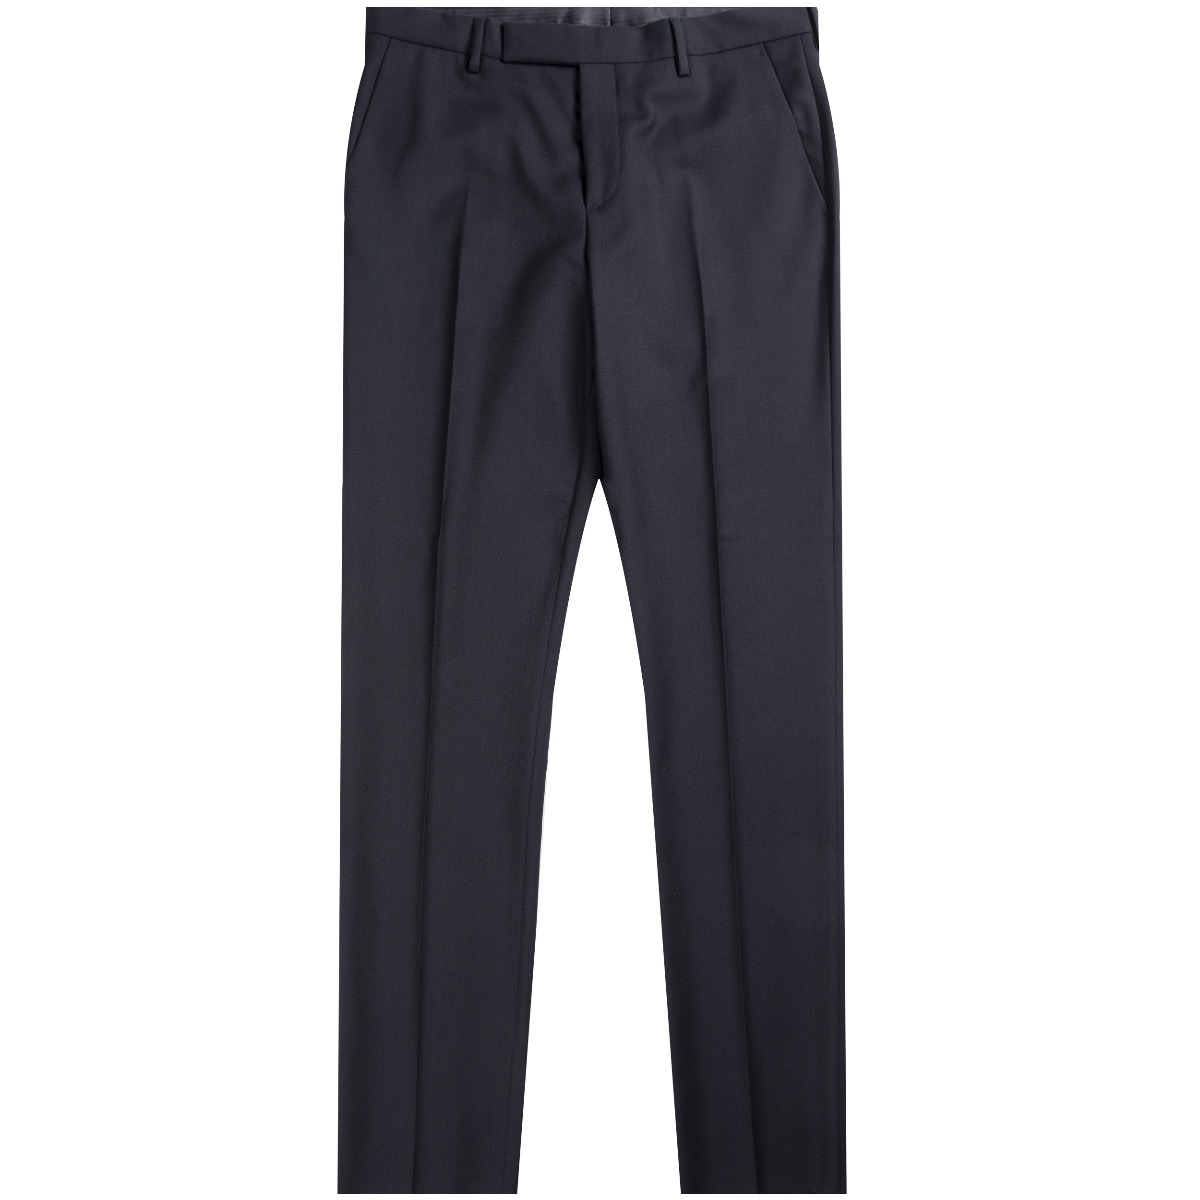 Paul Smith ’A Suit To Travel In’ Slim Fit Trouser Navy